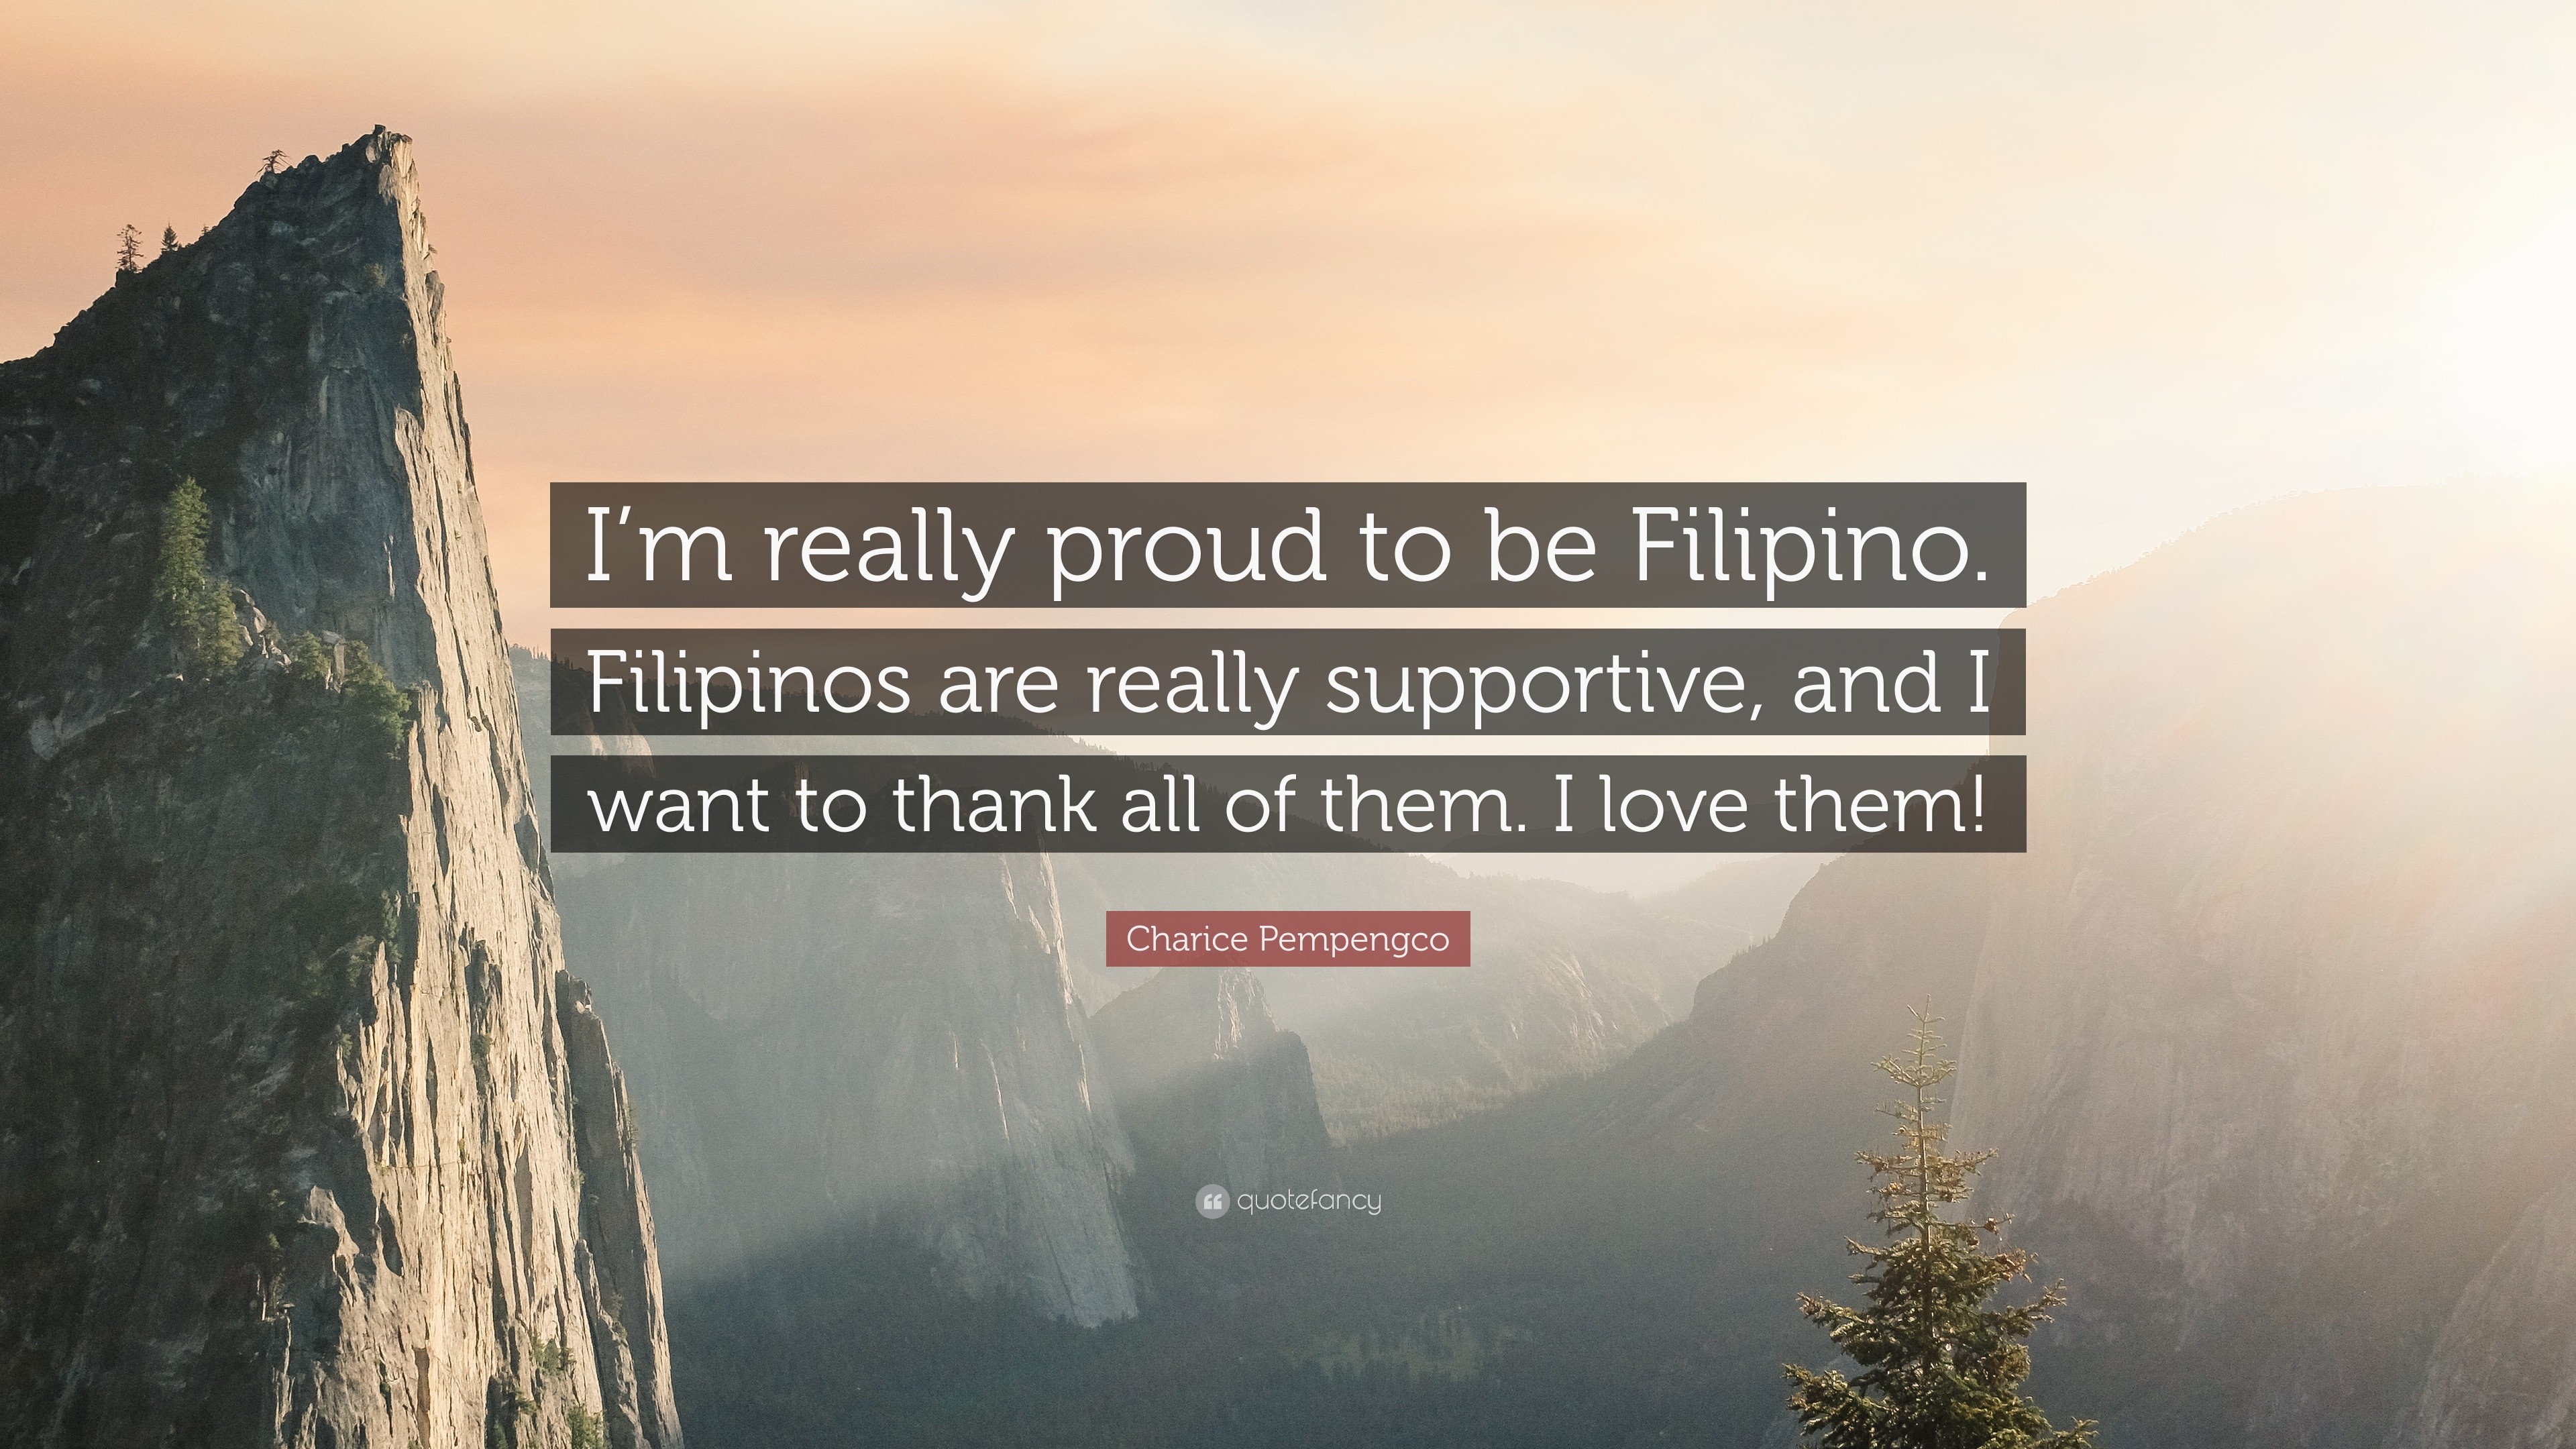 3840x2160 Charice Pempengco Quote: “I'm really proud to be Filipino. Filipinos are